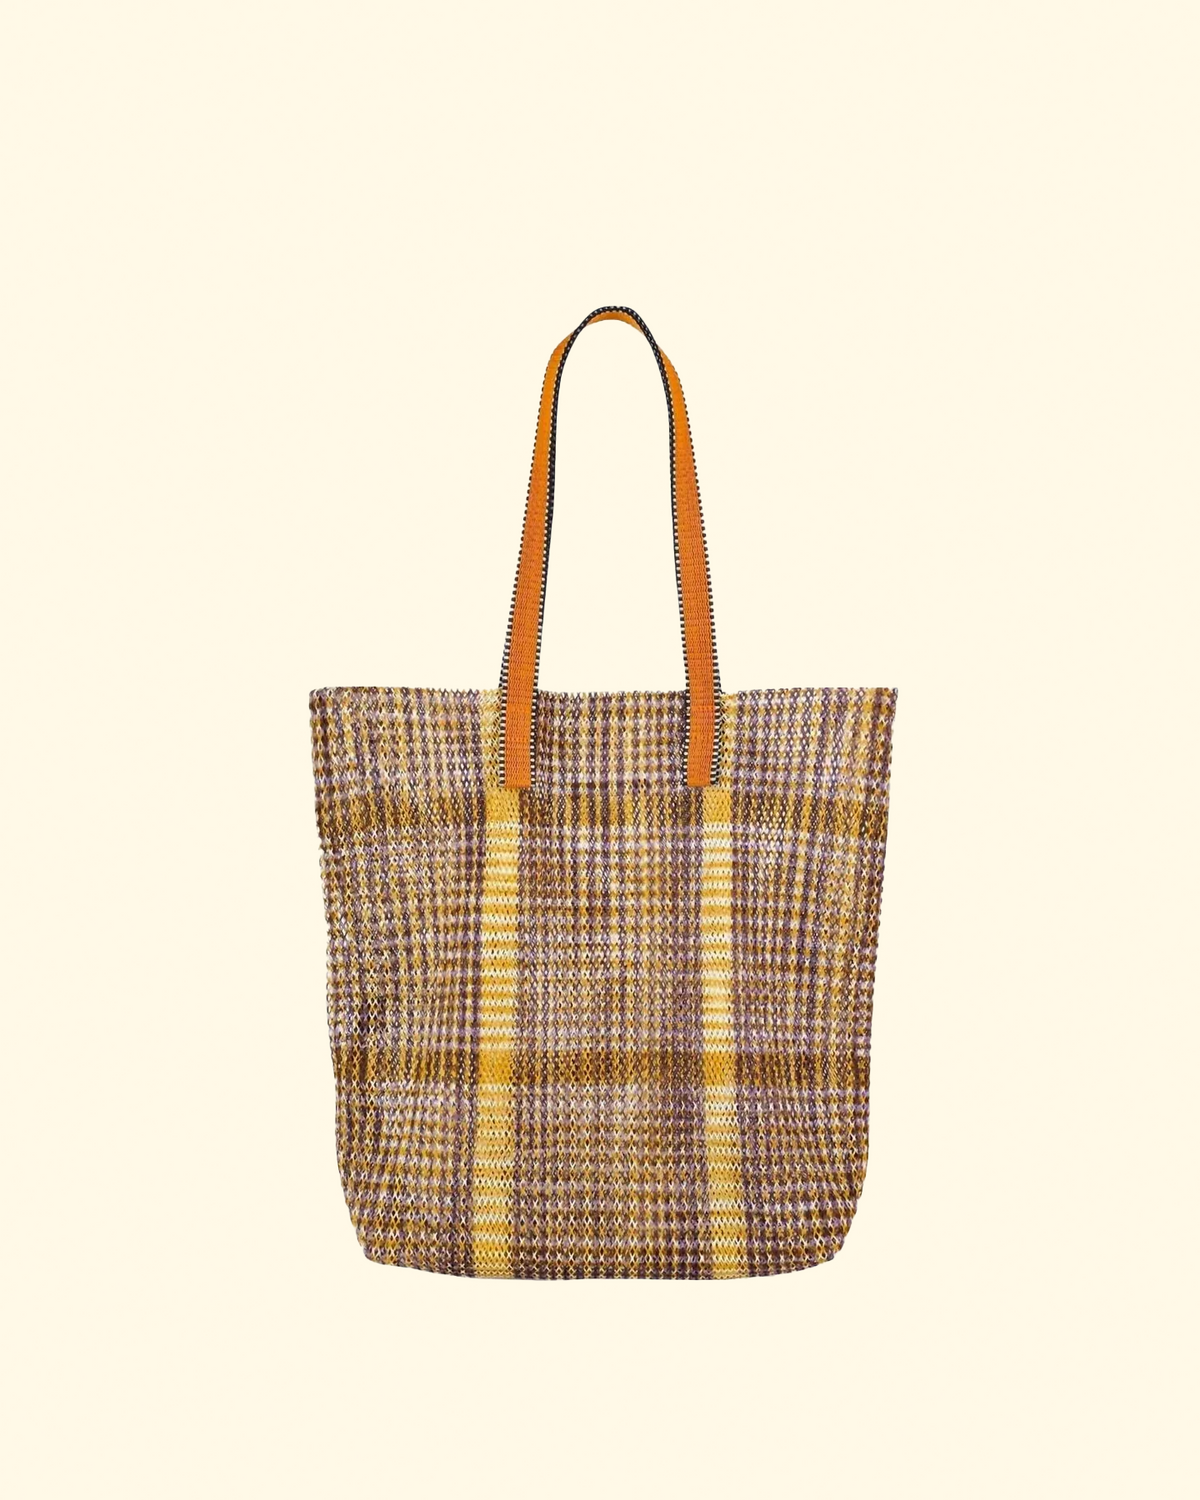 Kanpur Tote / Gold